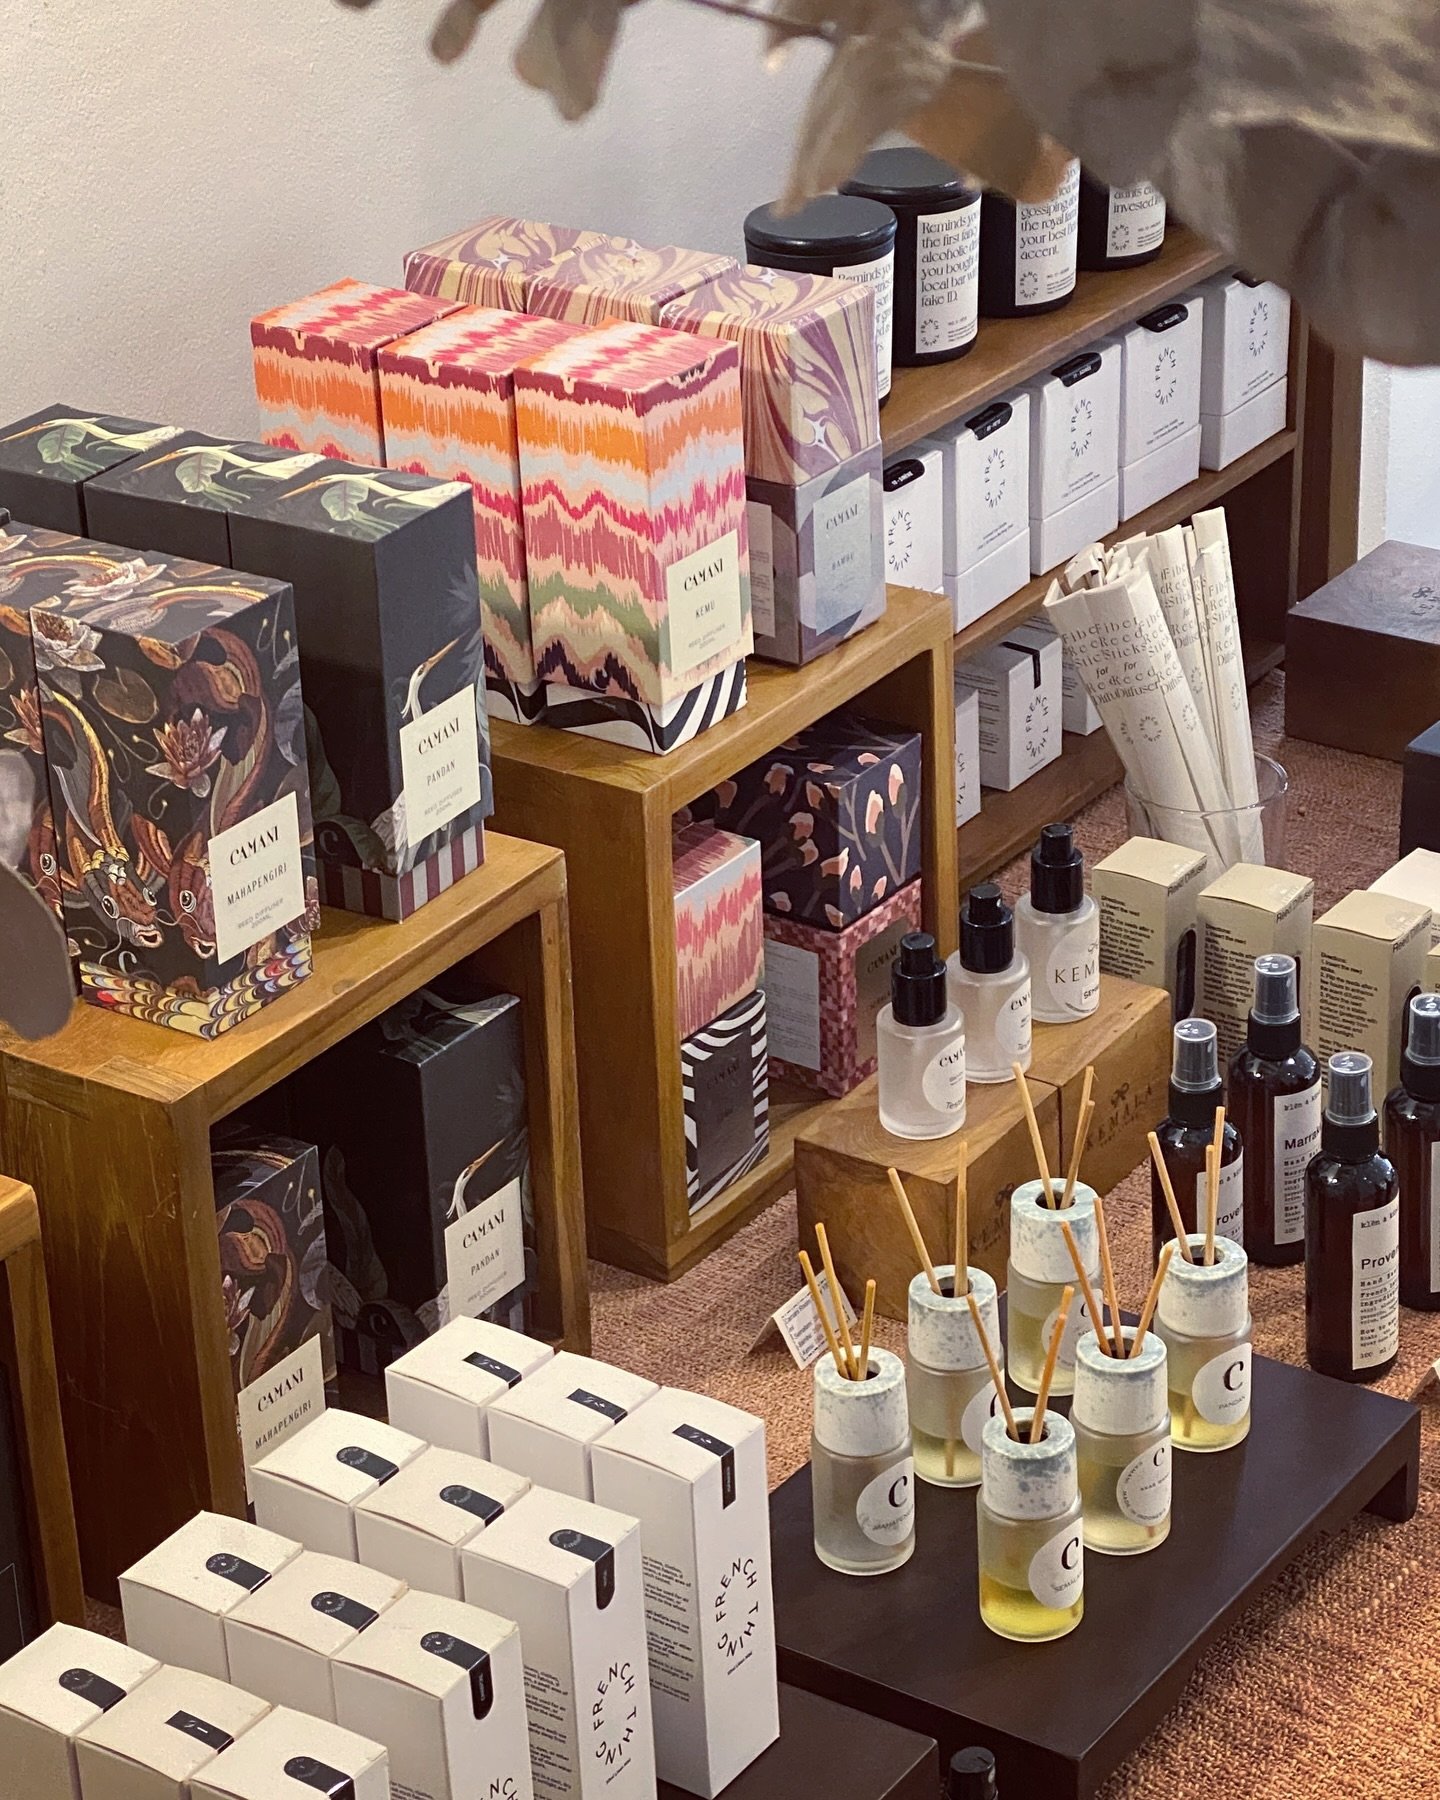 Discover exquisite scents in our home fragrance corner, highlighted by coveted brand partners @camanihome, @klenandkind and @french_thing_ You're bound to find a favourite from our well-curated selection of candles, reed diffusers, room sprays, and l